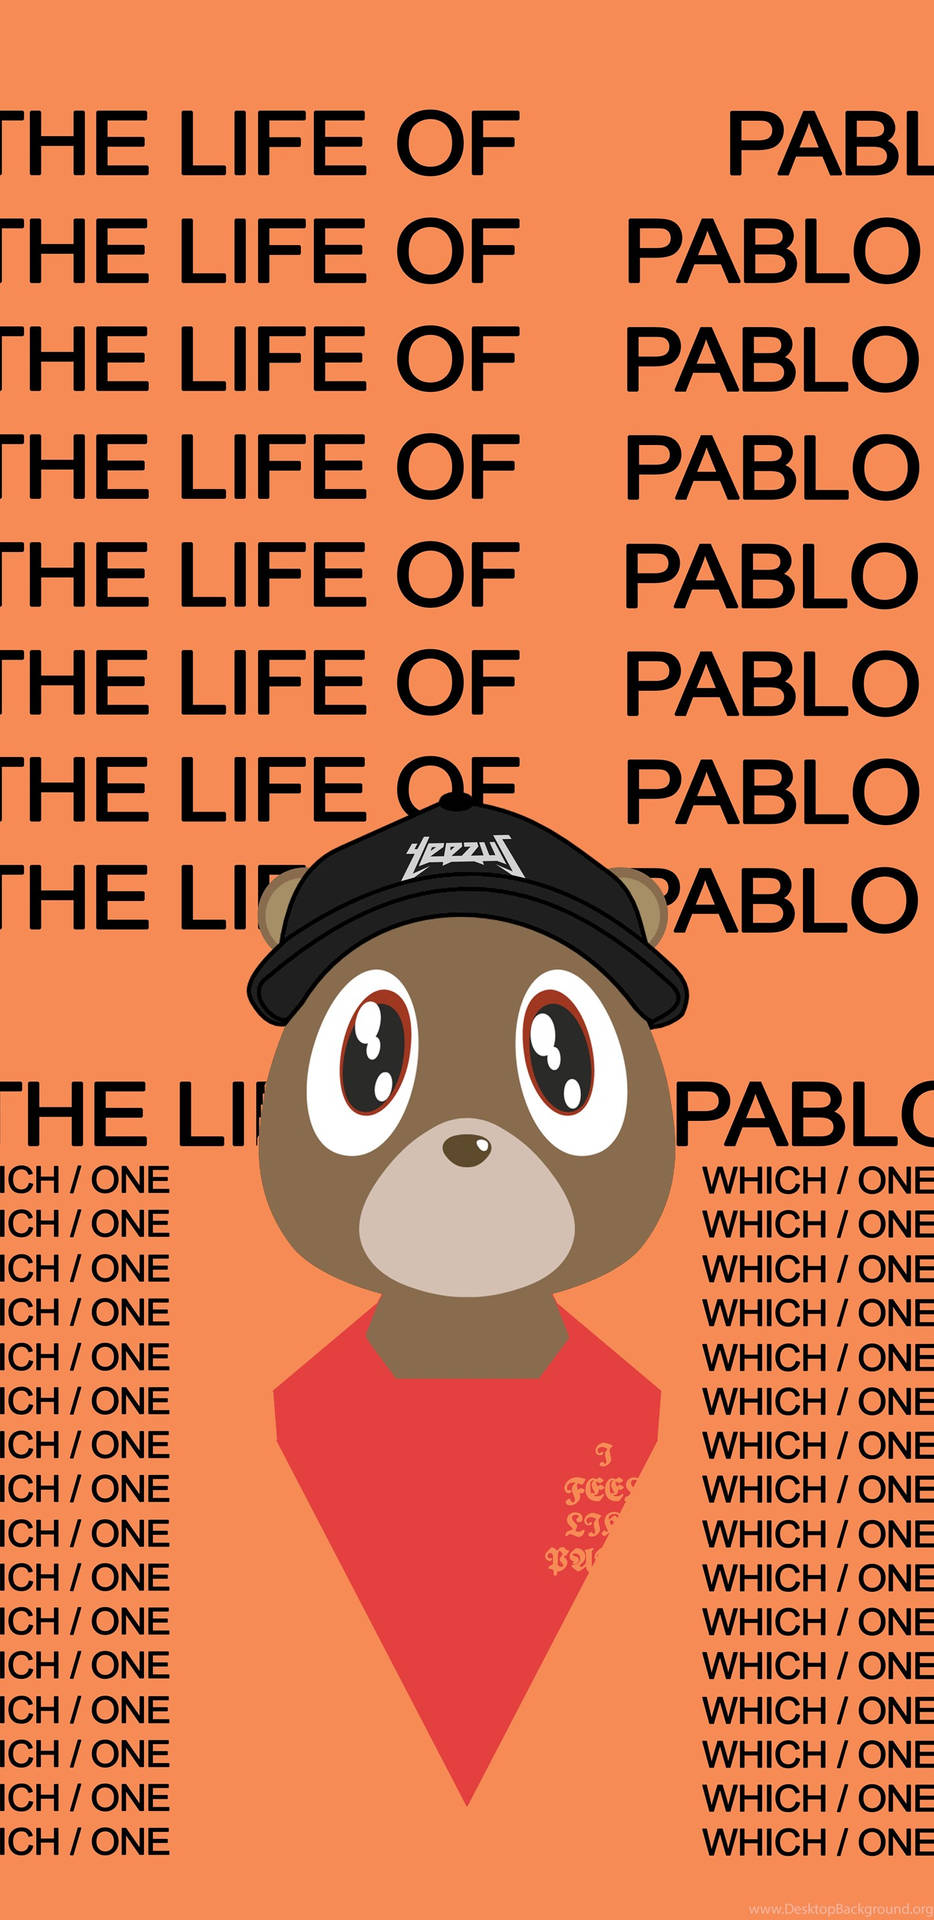 Kanyewest Björn The Life Of Pablo. Wallpaper